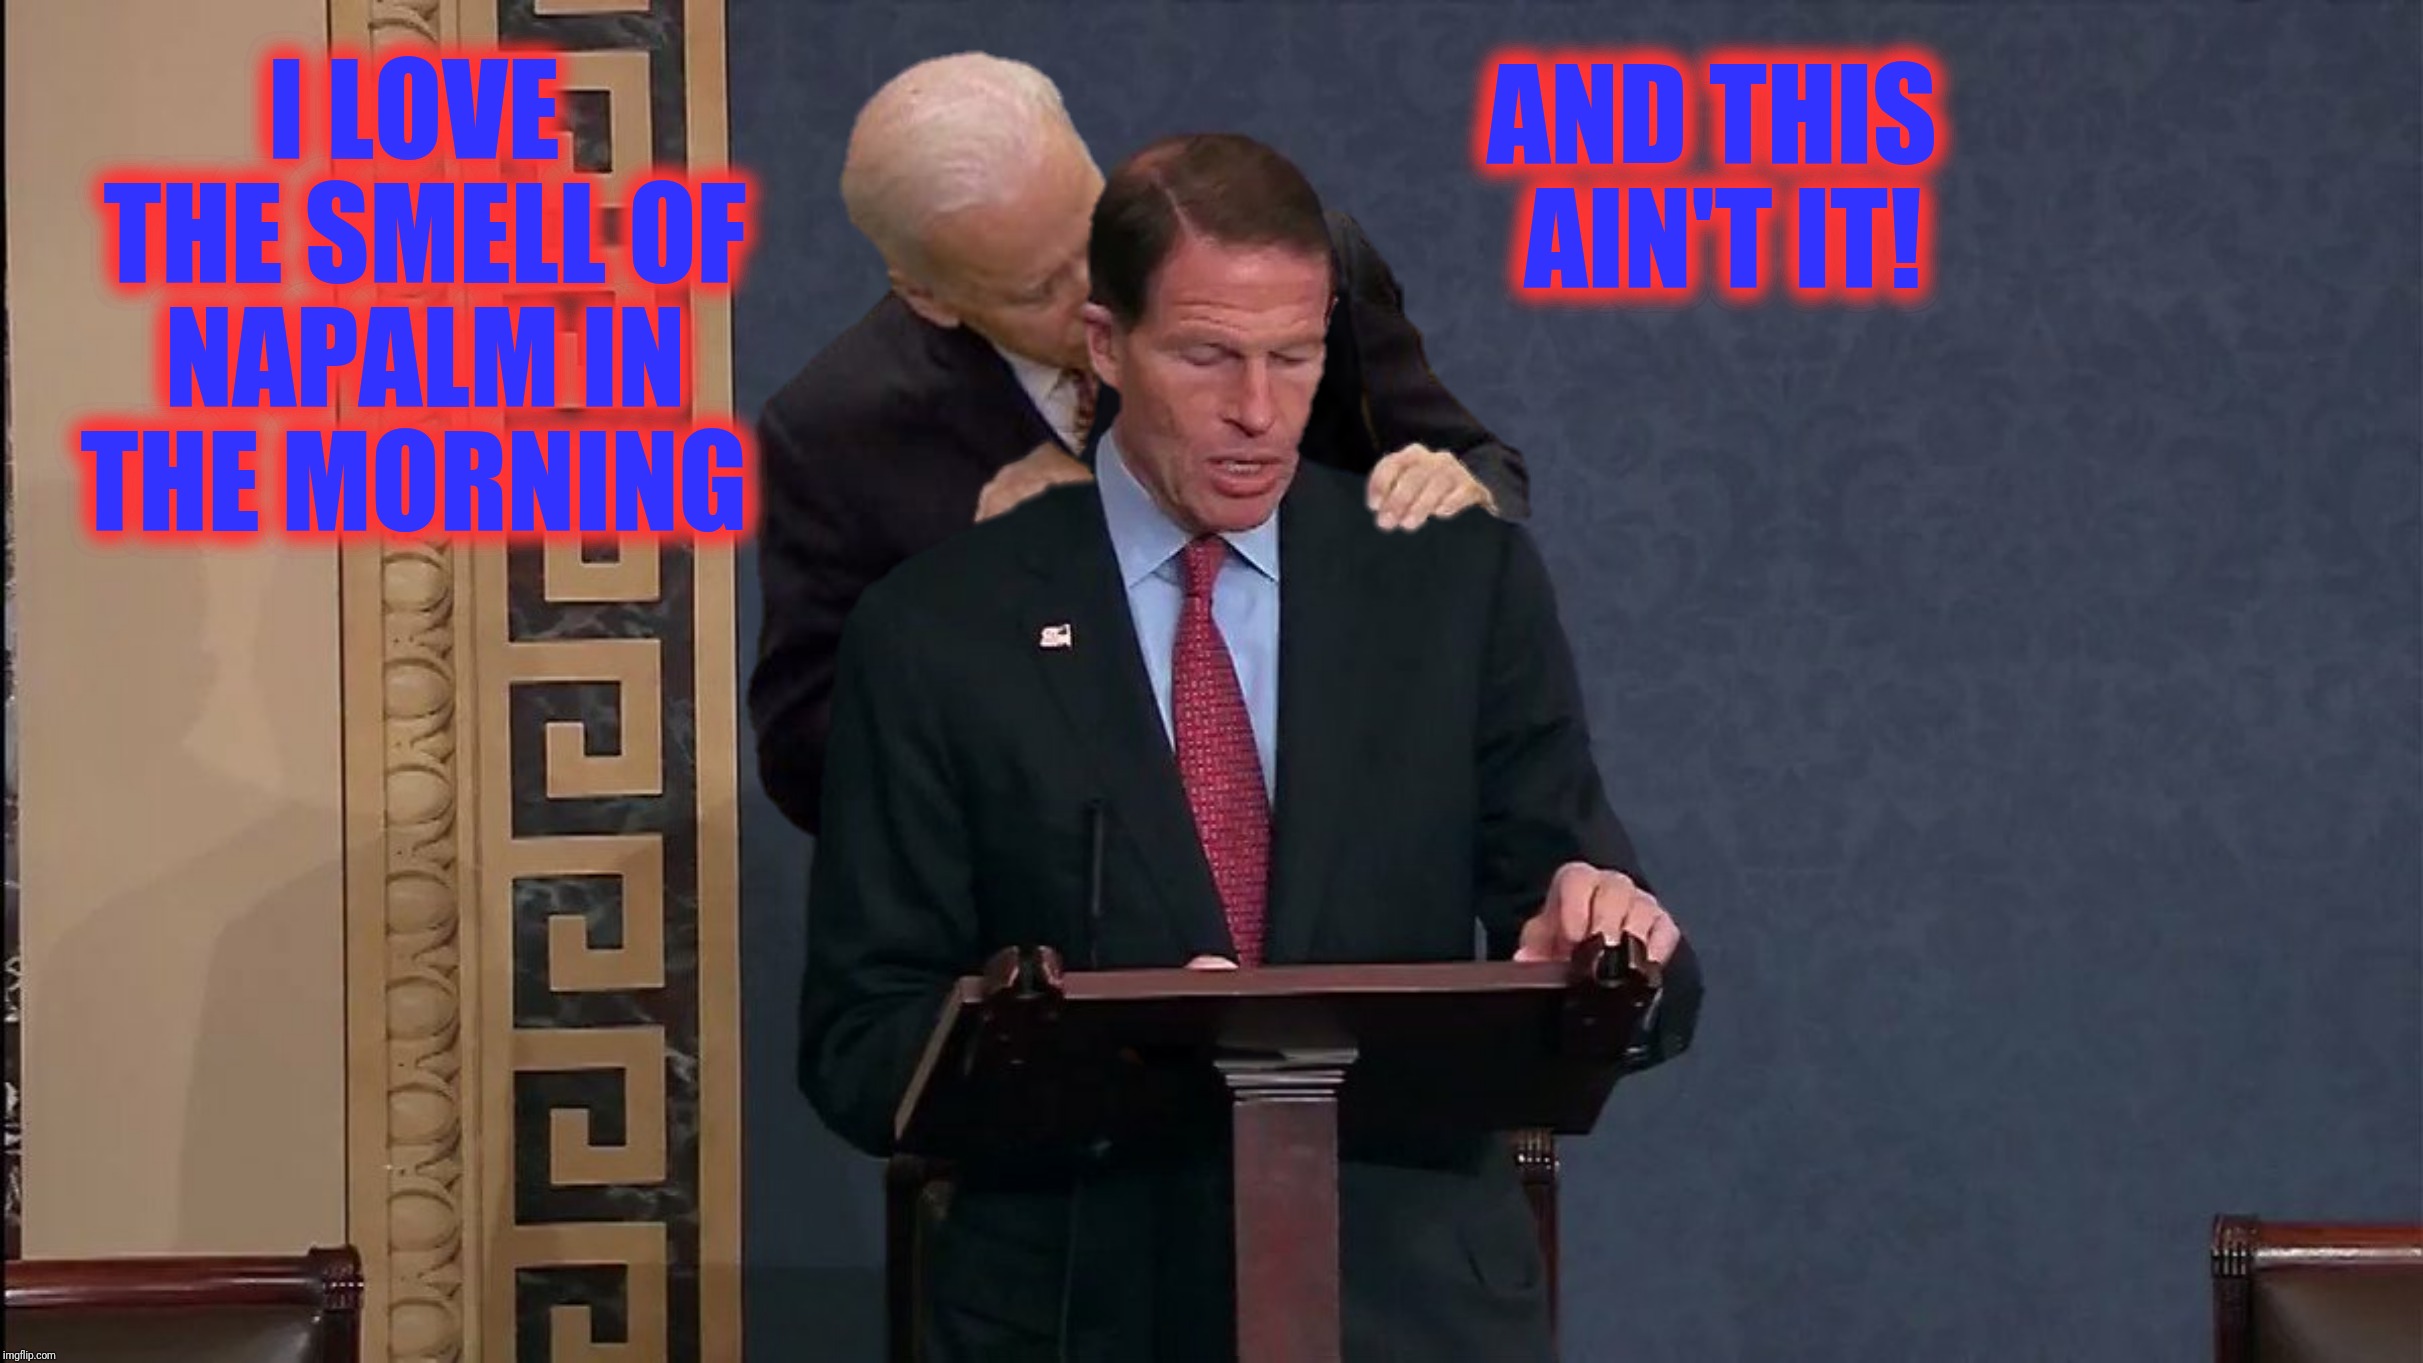 Joe smelling a Dick | I LOVE THE SMELL OF NAPALM IN THE MORNING; AND THIS AIN'T IT! | image tagged in bad photoshop,creepy joe biden,dick blumenthal,napalm,vietnam | made w/ Imgflip meme maker